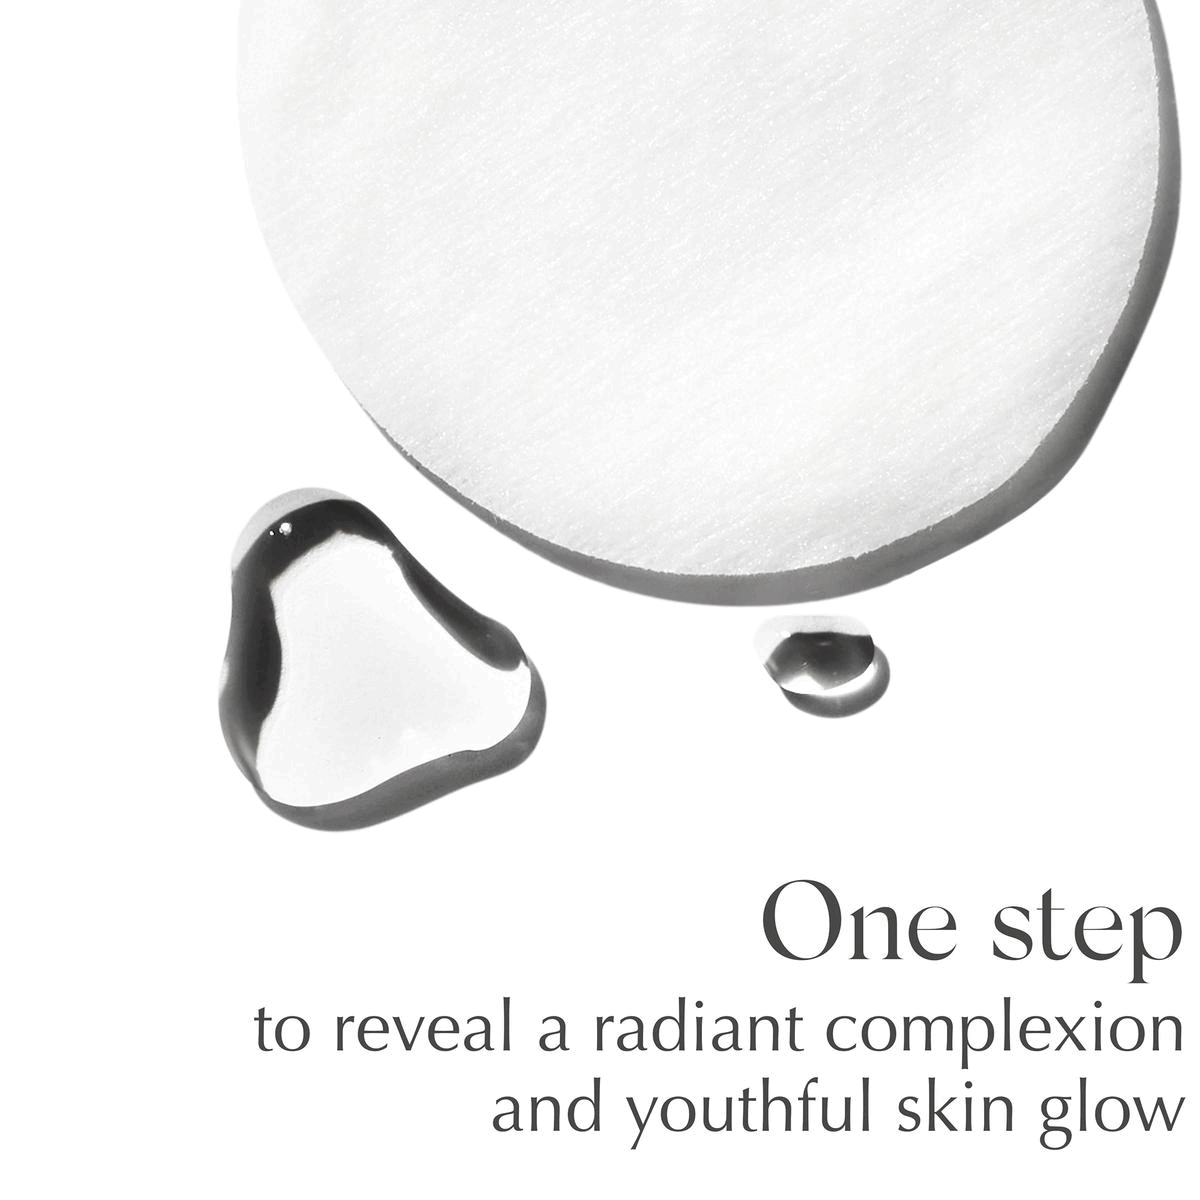 Image 1, one step to reveal a radiant complexion and youthful skin glow. Image 2, bring new life to stressed skin. Image 3, shed dry, dull surface layers